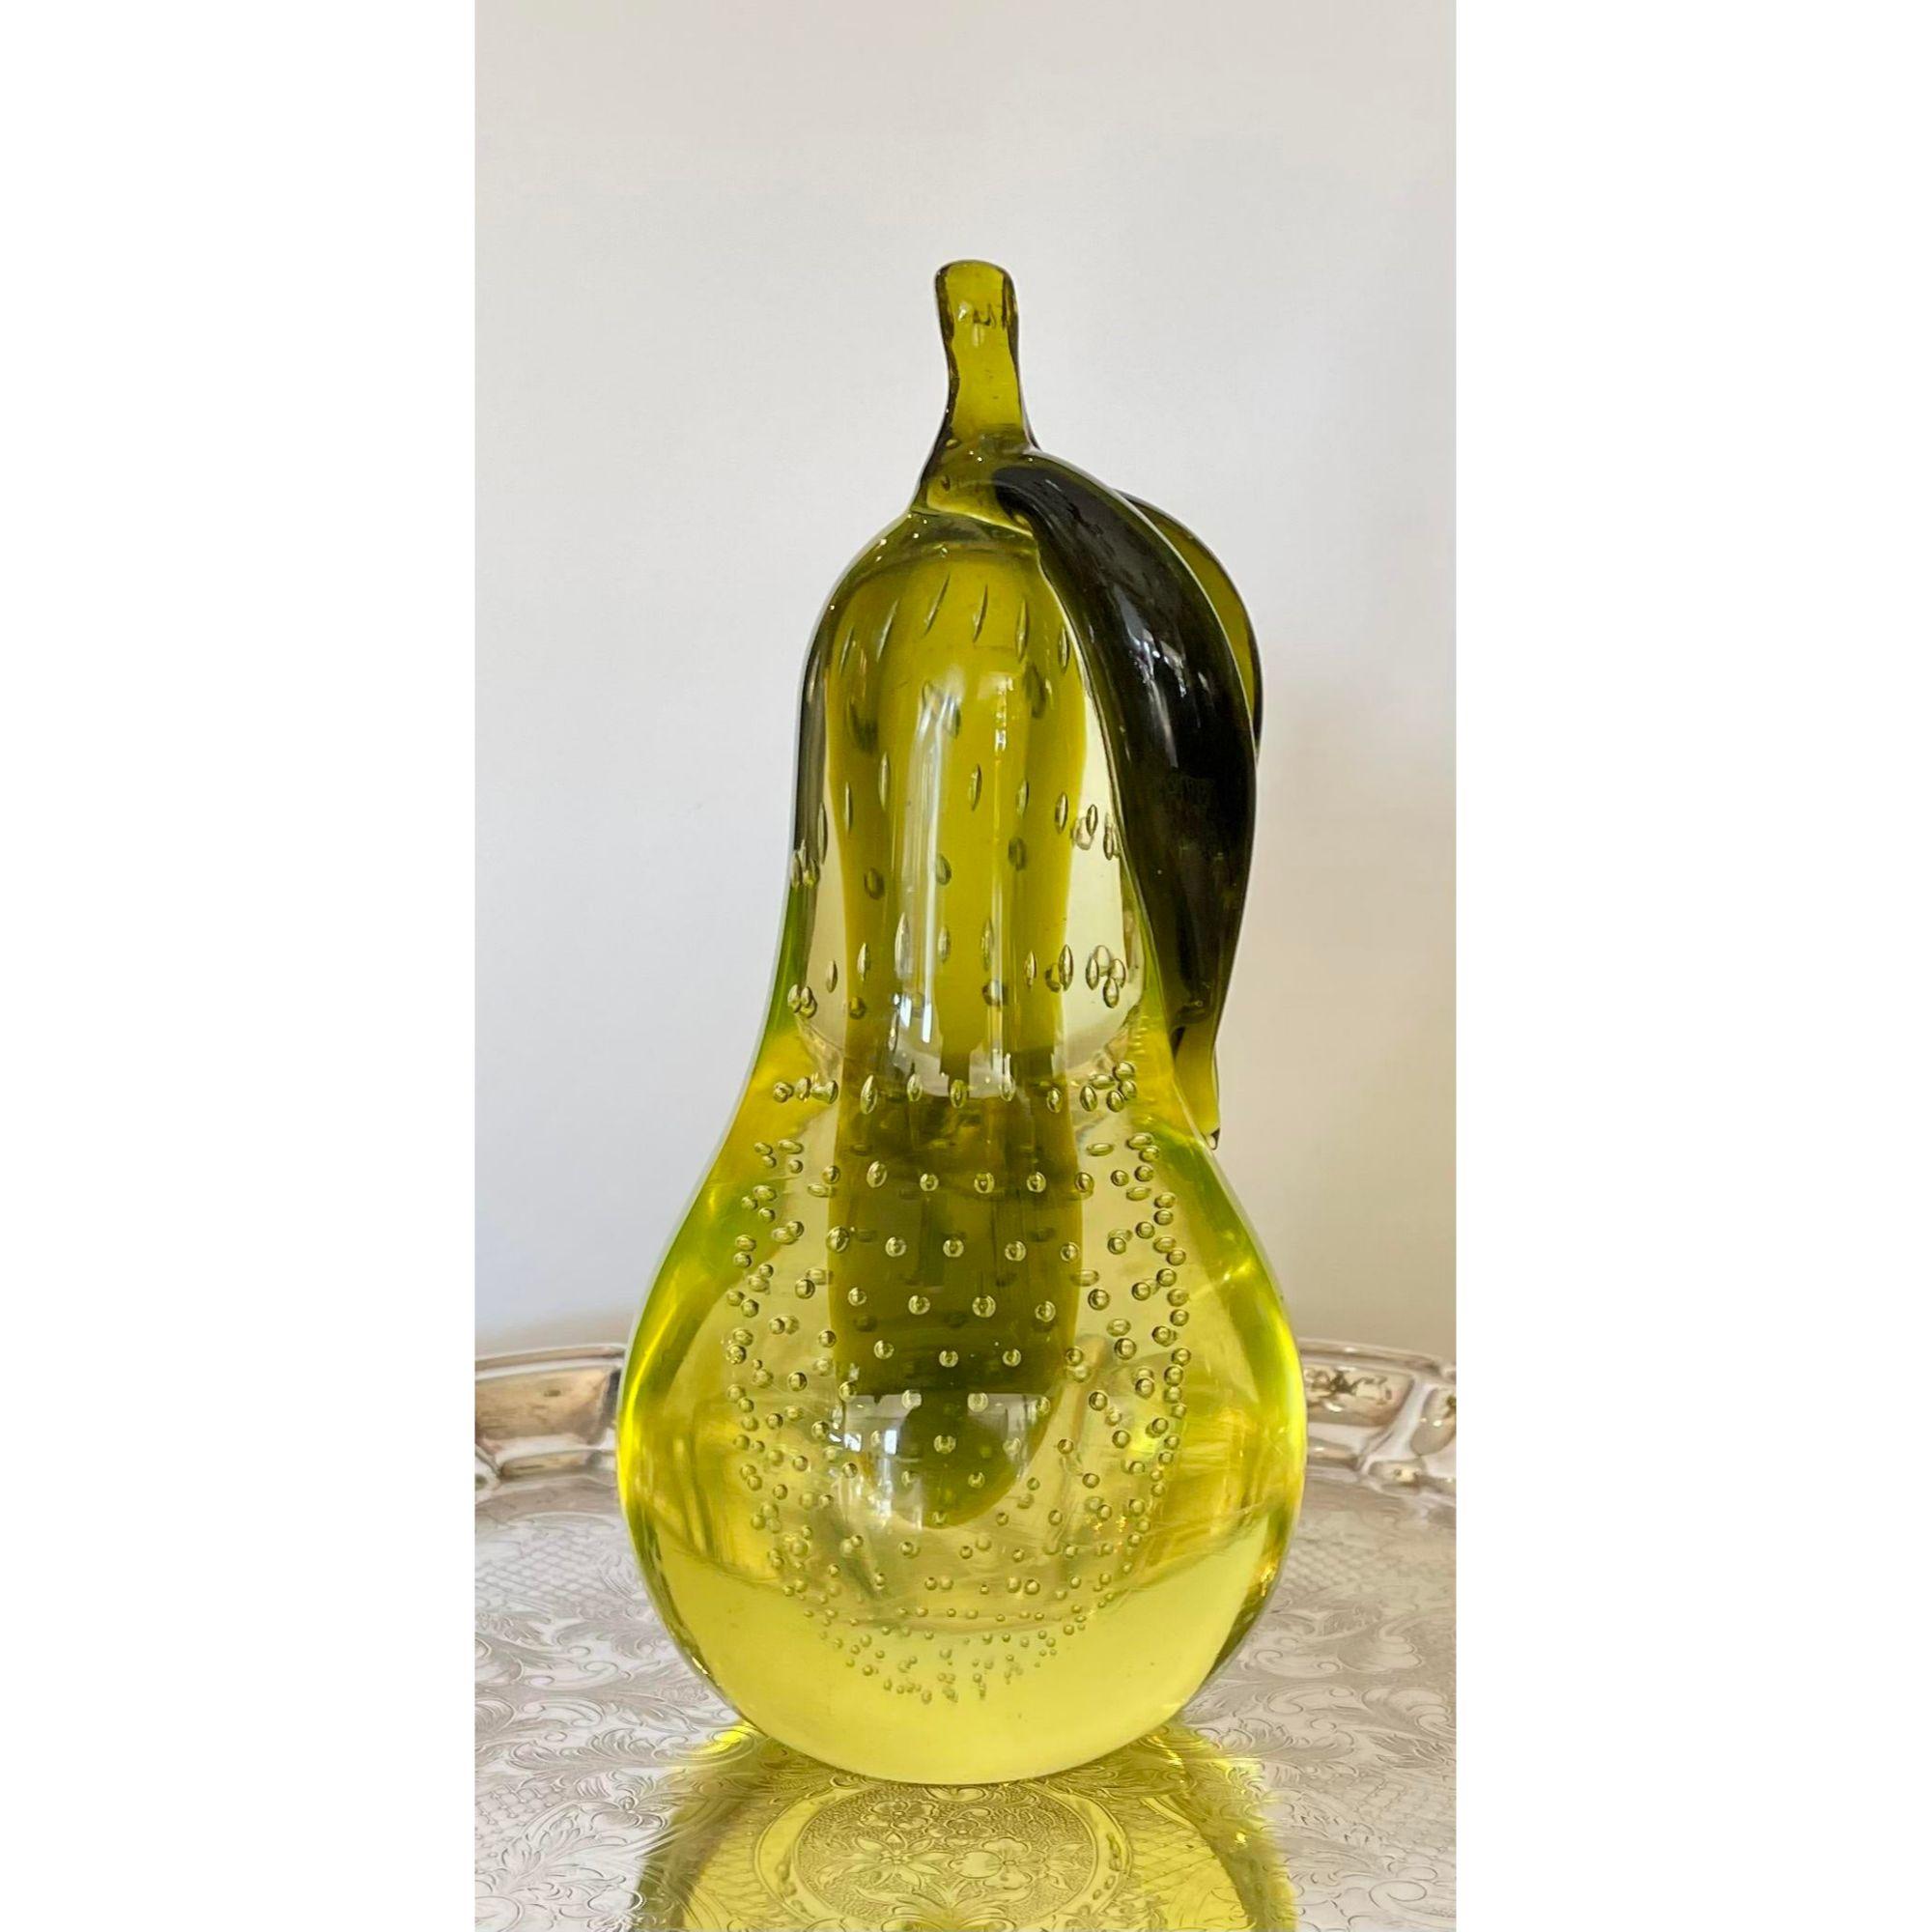 Mid-Century Modern Murano glass Magnum pear paperweight. It glows brightly under black light testing and dates to the 1950’s

Additional information: 
Materials: Murano Glass
Color: Chartreuse
Brand: Livio Seguso
Designer: Livio